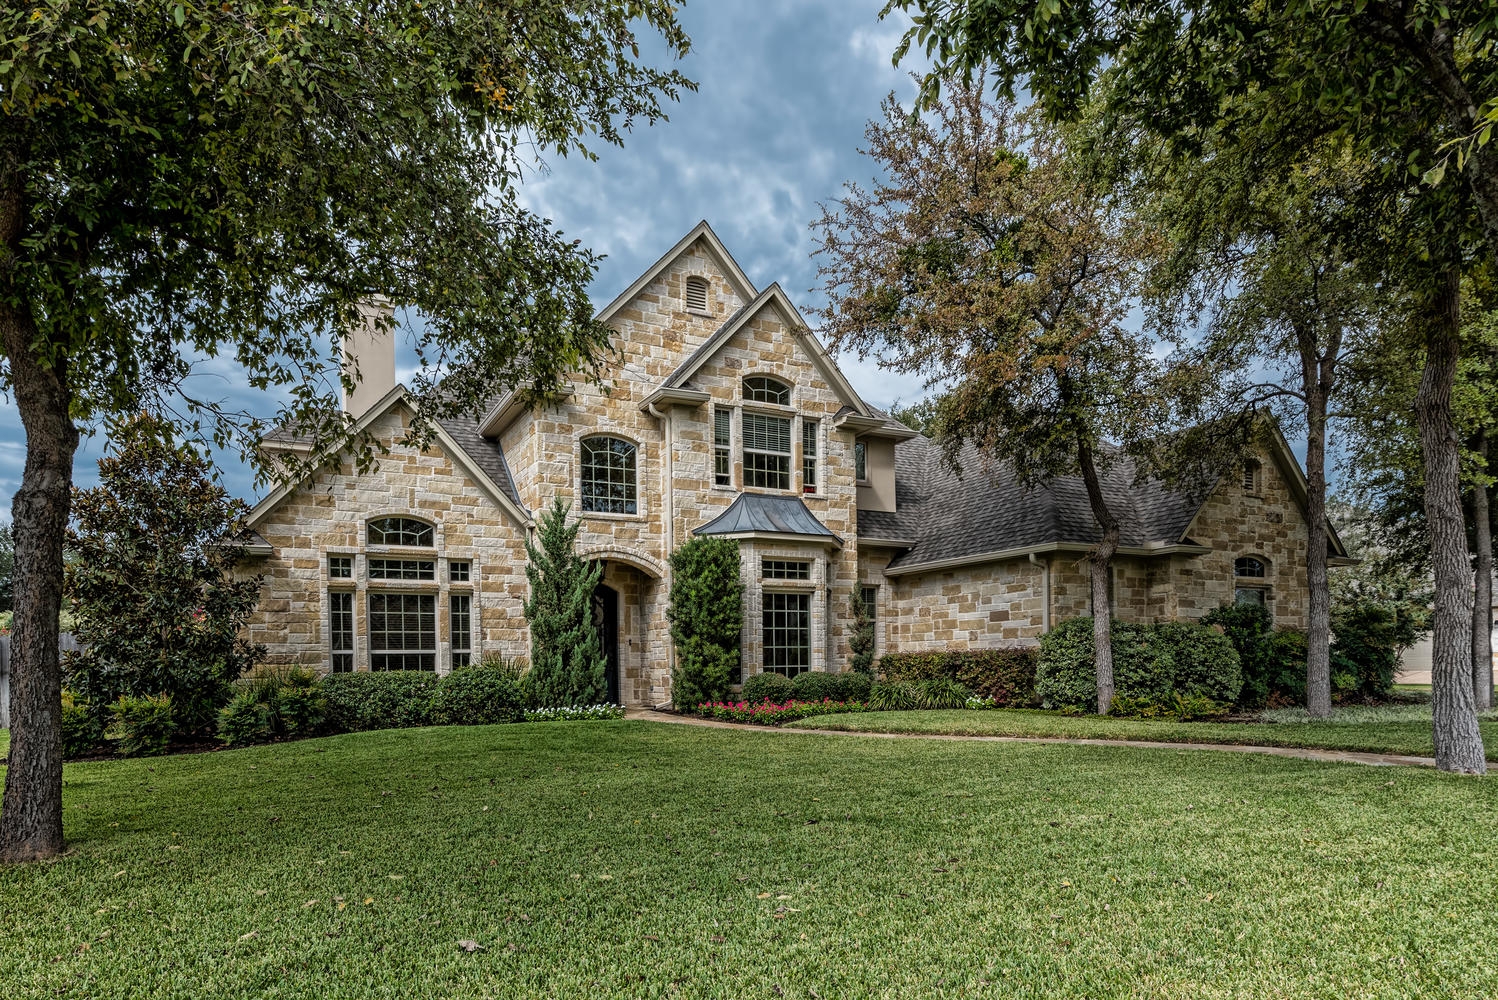 8412 Spicewood Springs China-large-003-16-Sample Home 3-1498x1000-72dpi